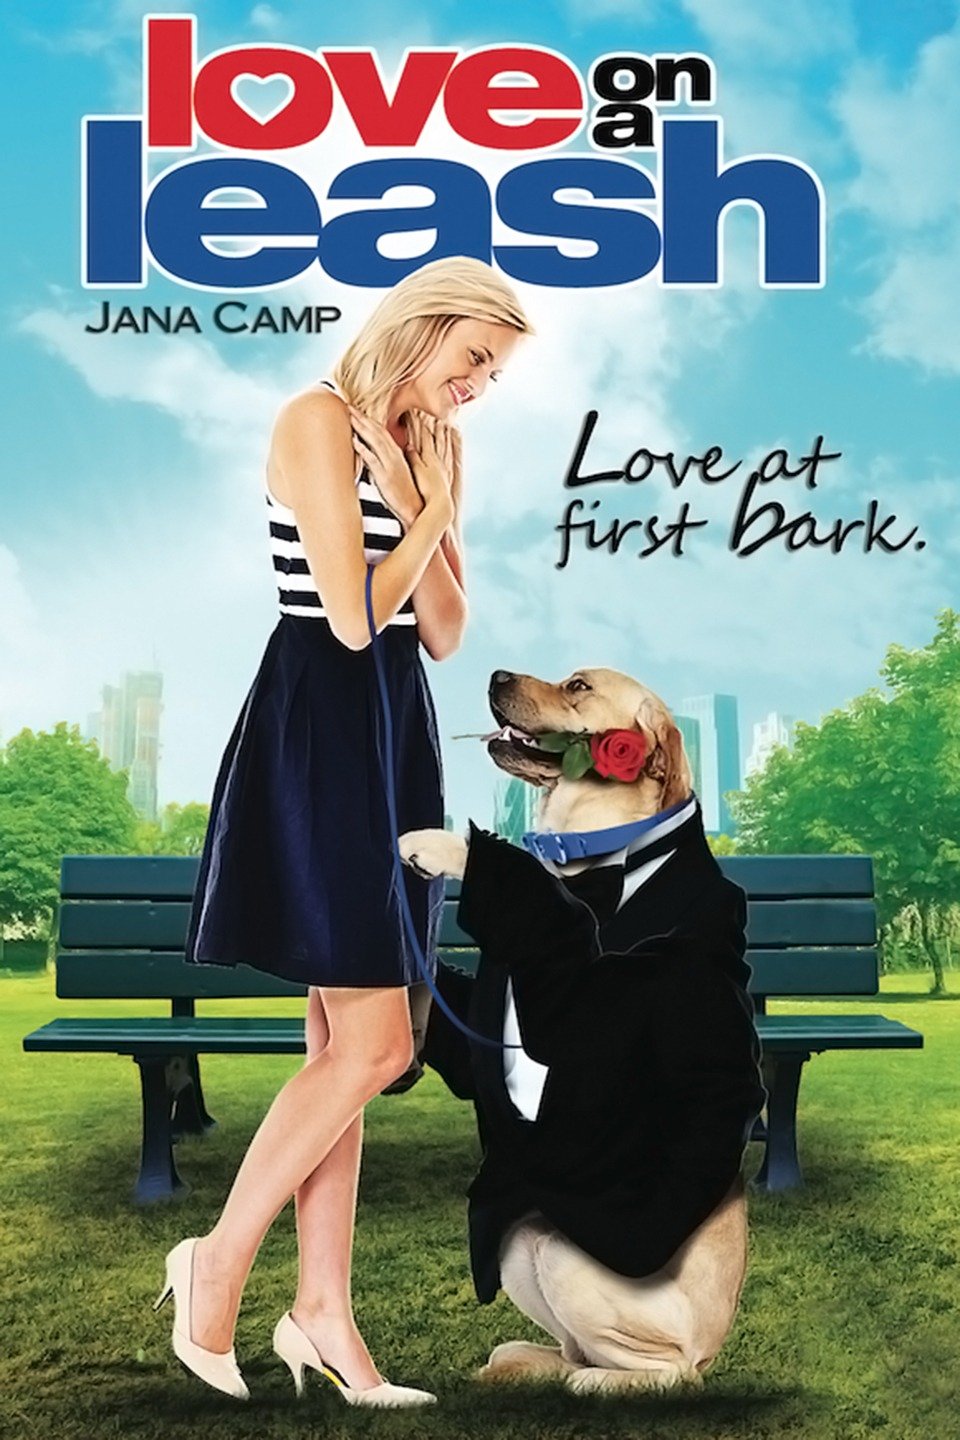 Love and leashes full movie